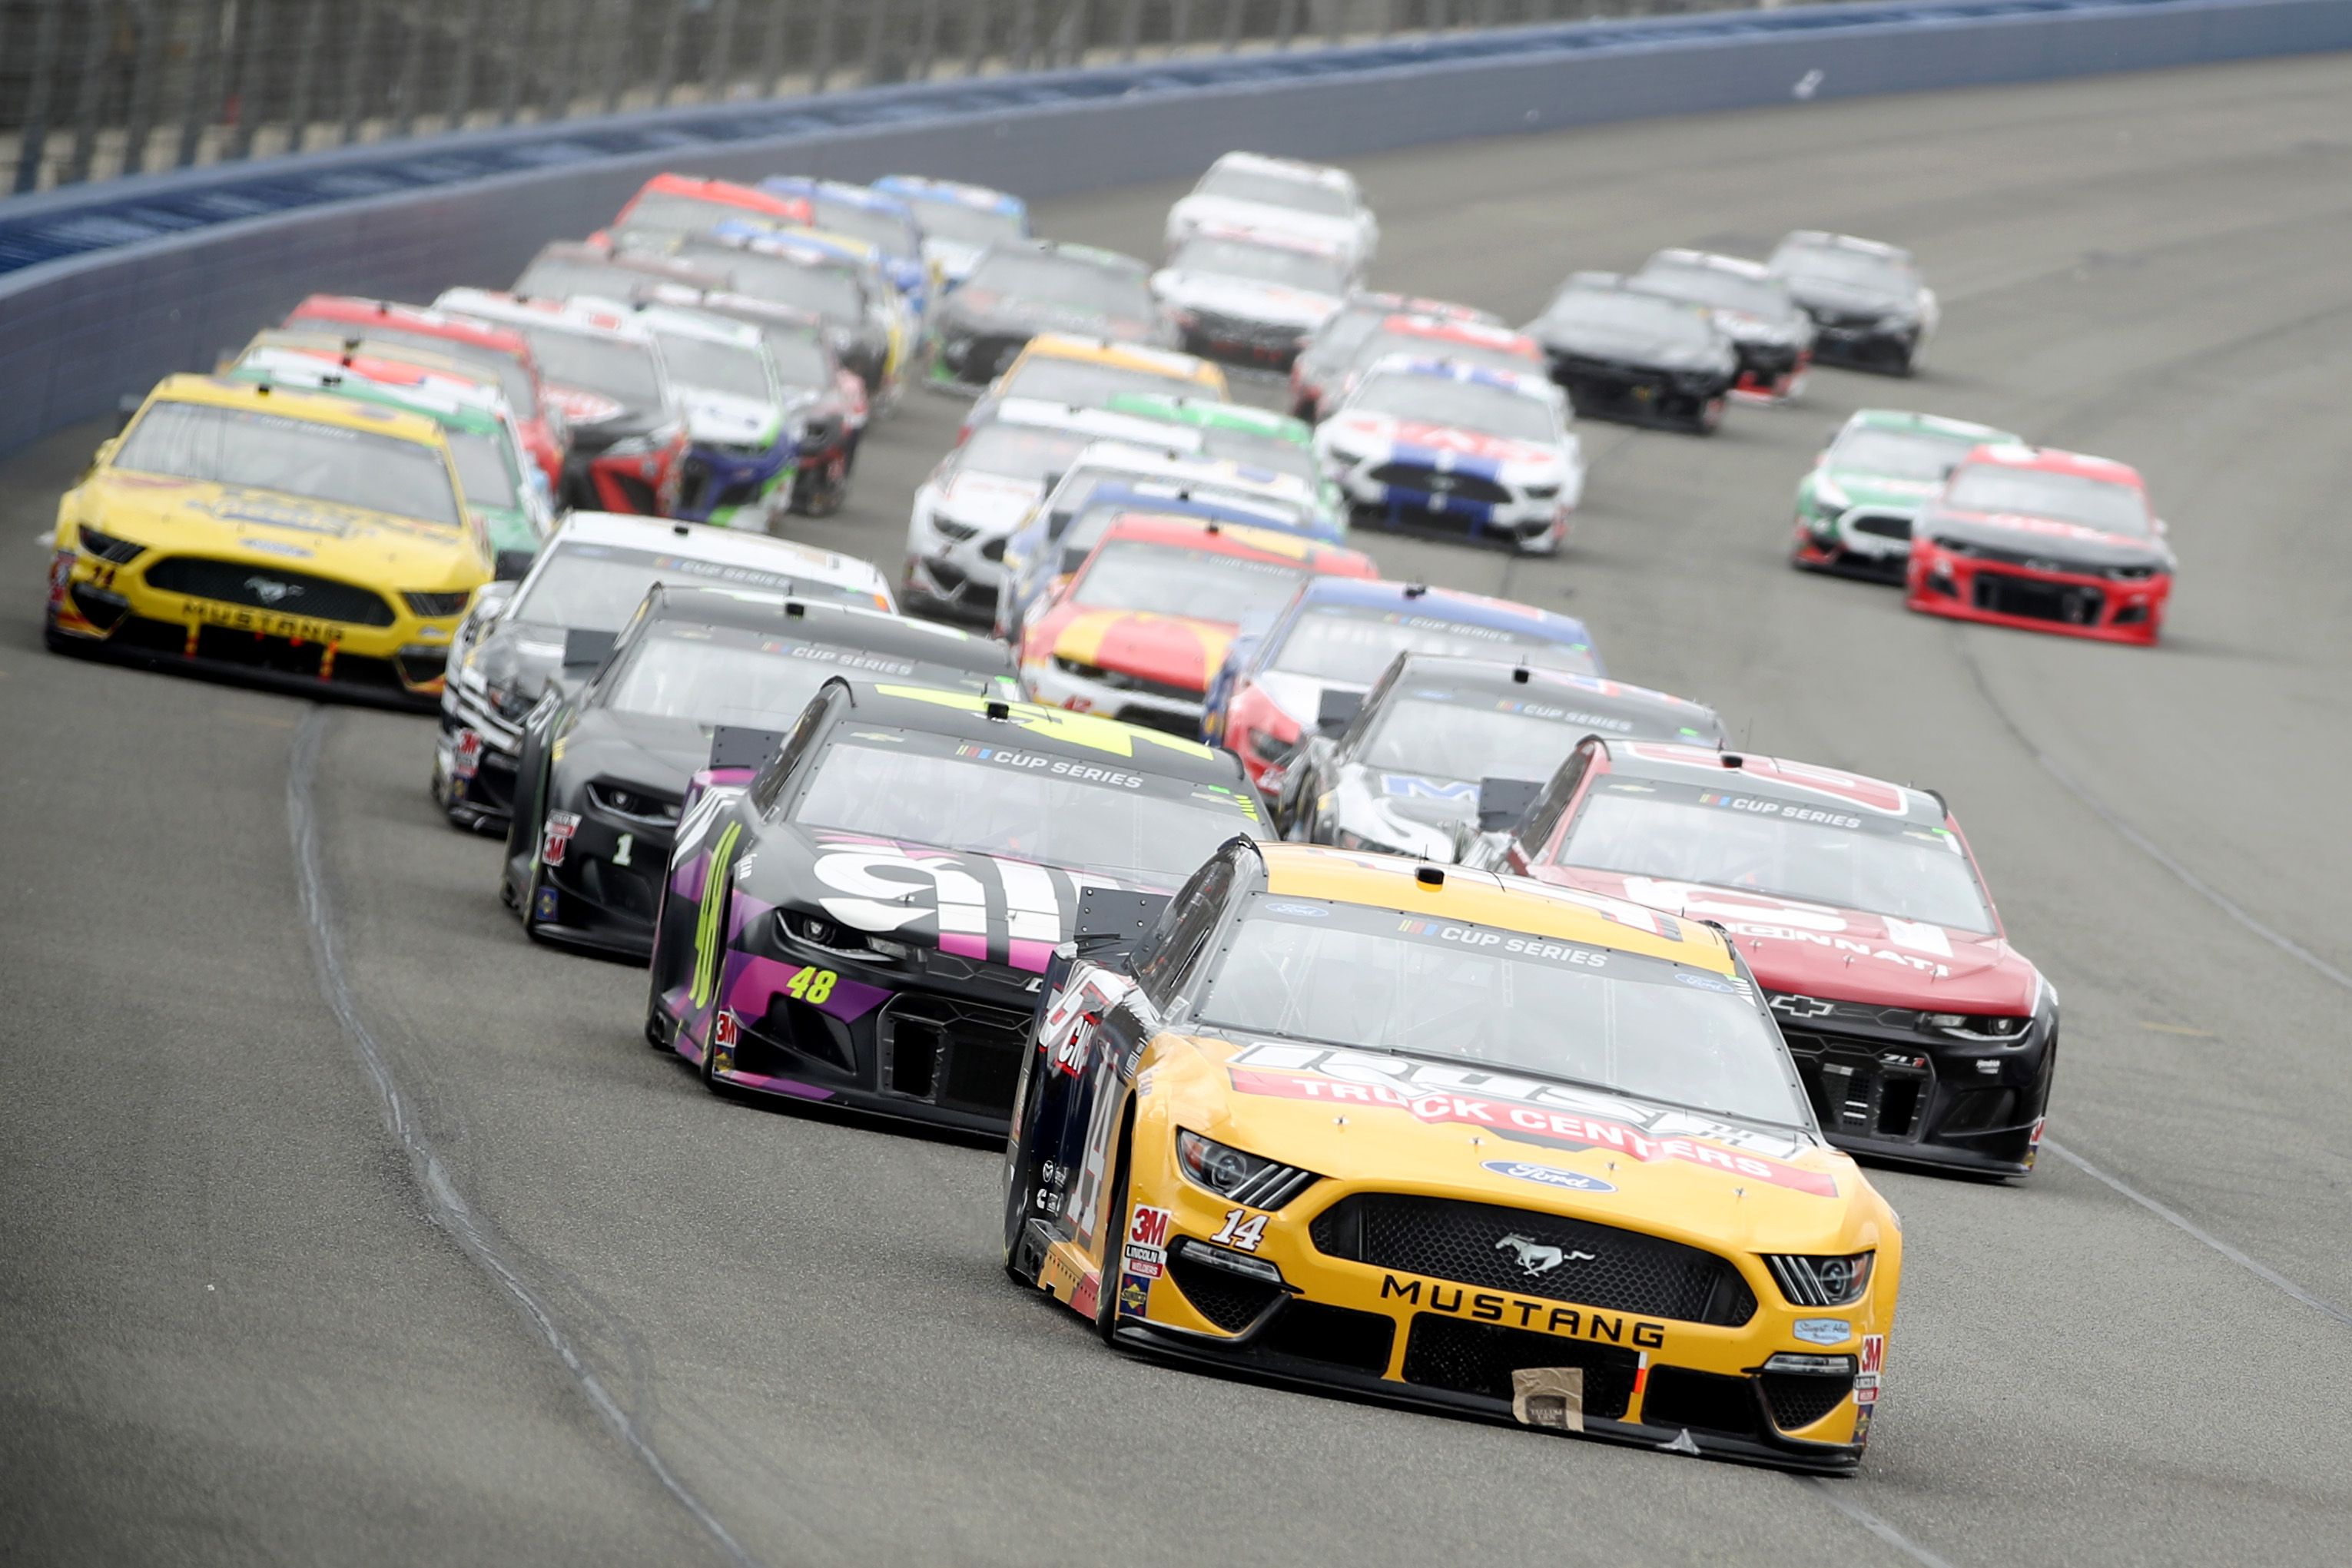 Auto Club Speedway's two-mile era ends with NASCAR on Sunday - Los